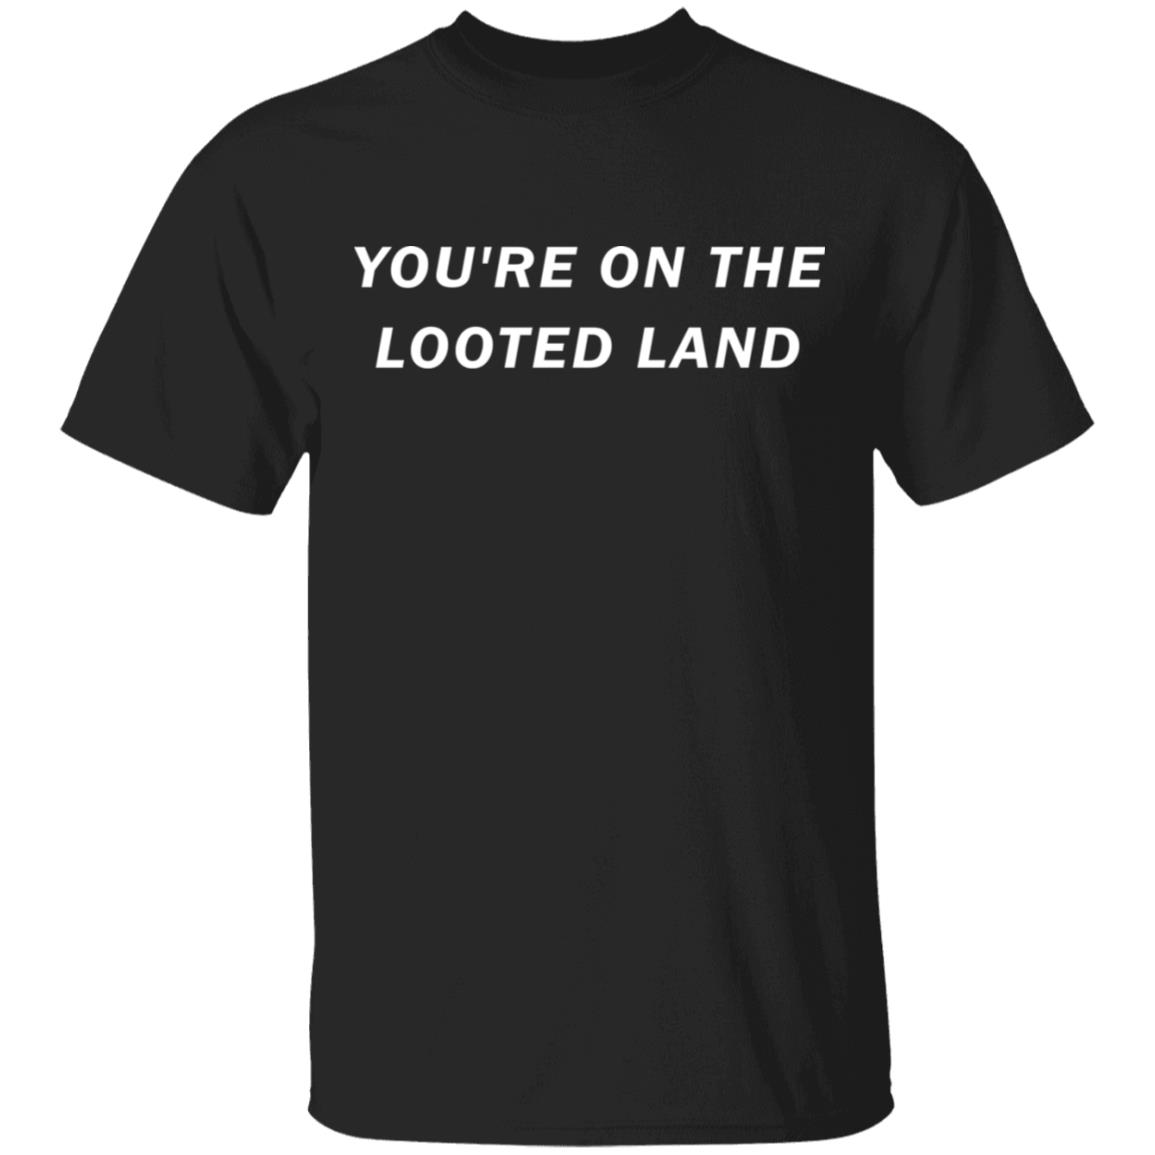 You’re on the looted land shirt - Rockatee